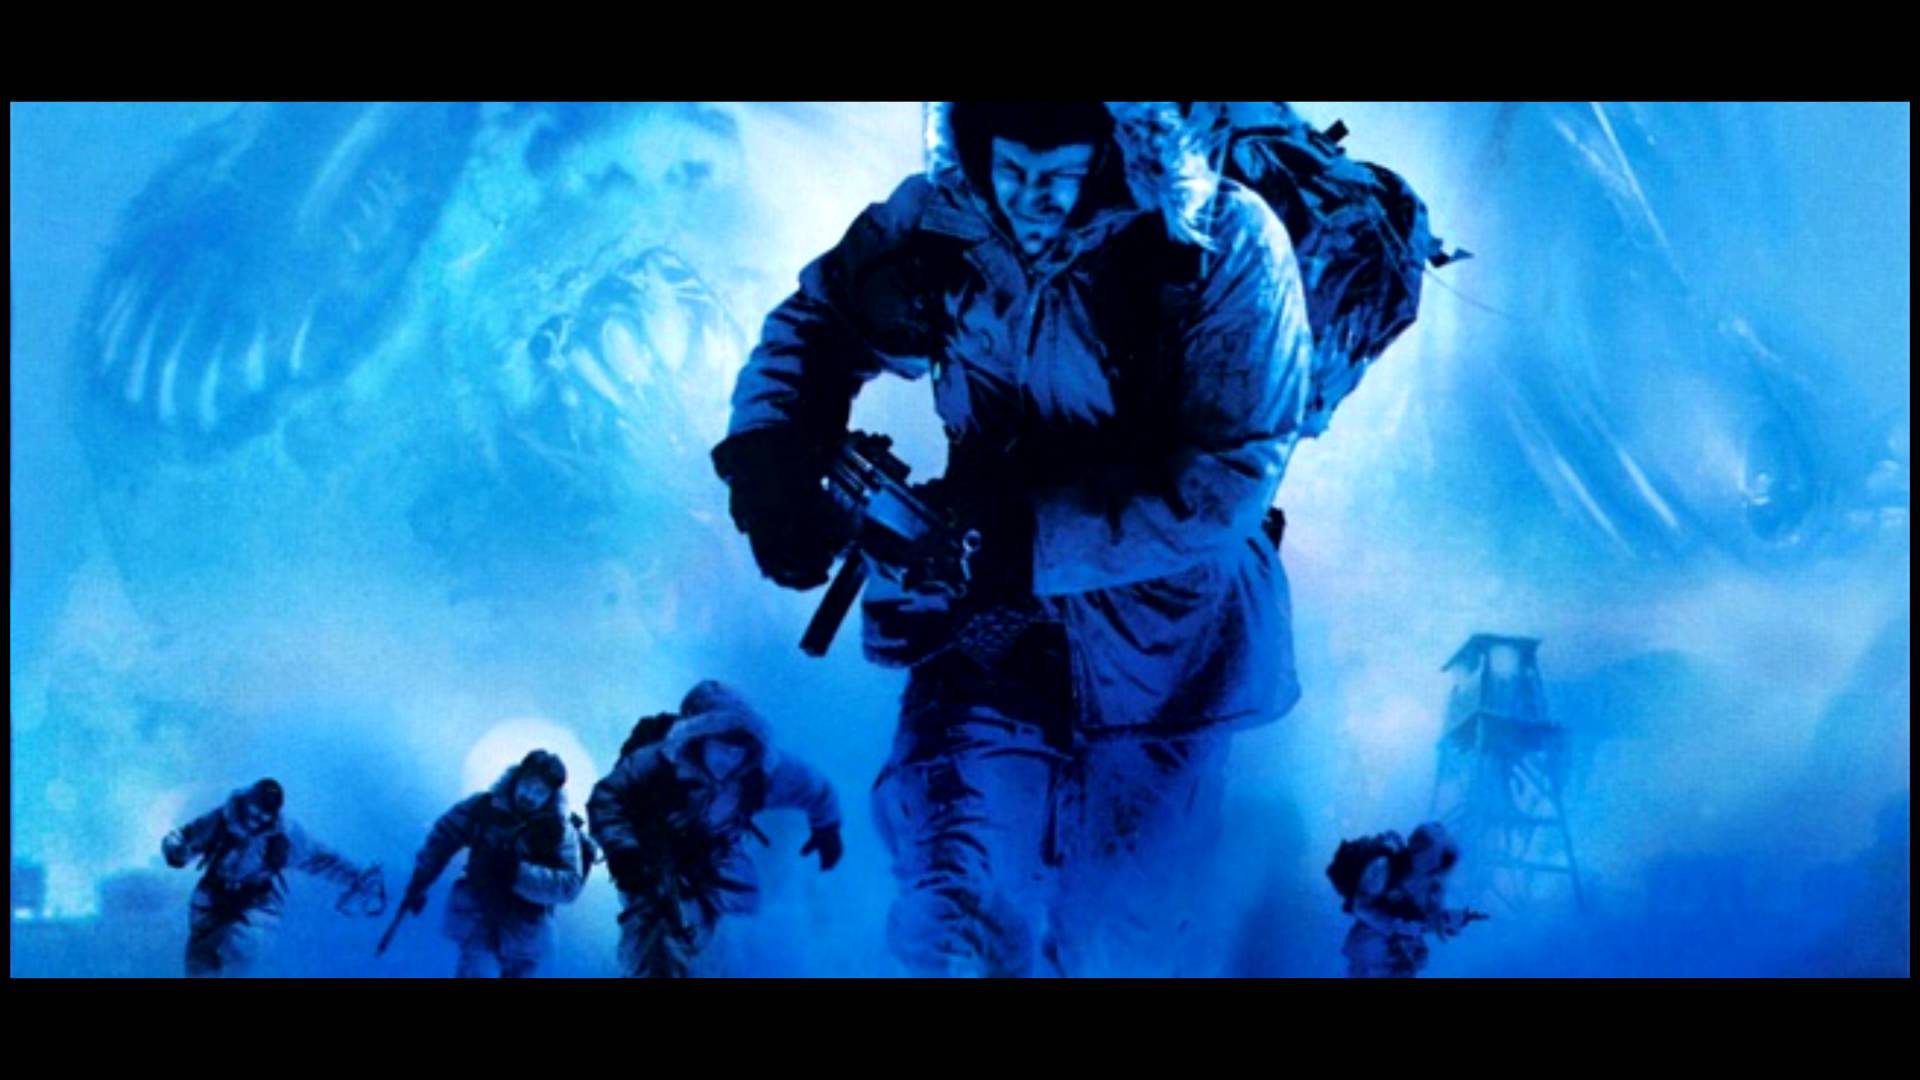 the thing wallpaper,action adventure game,action figure,movie,games,screenshot